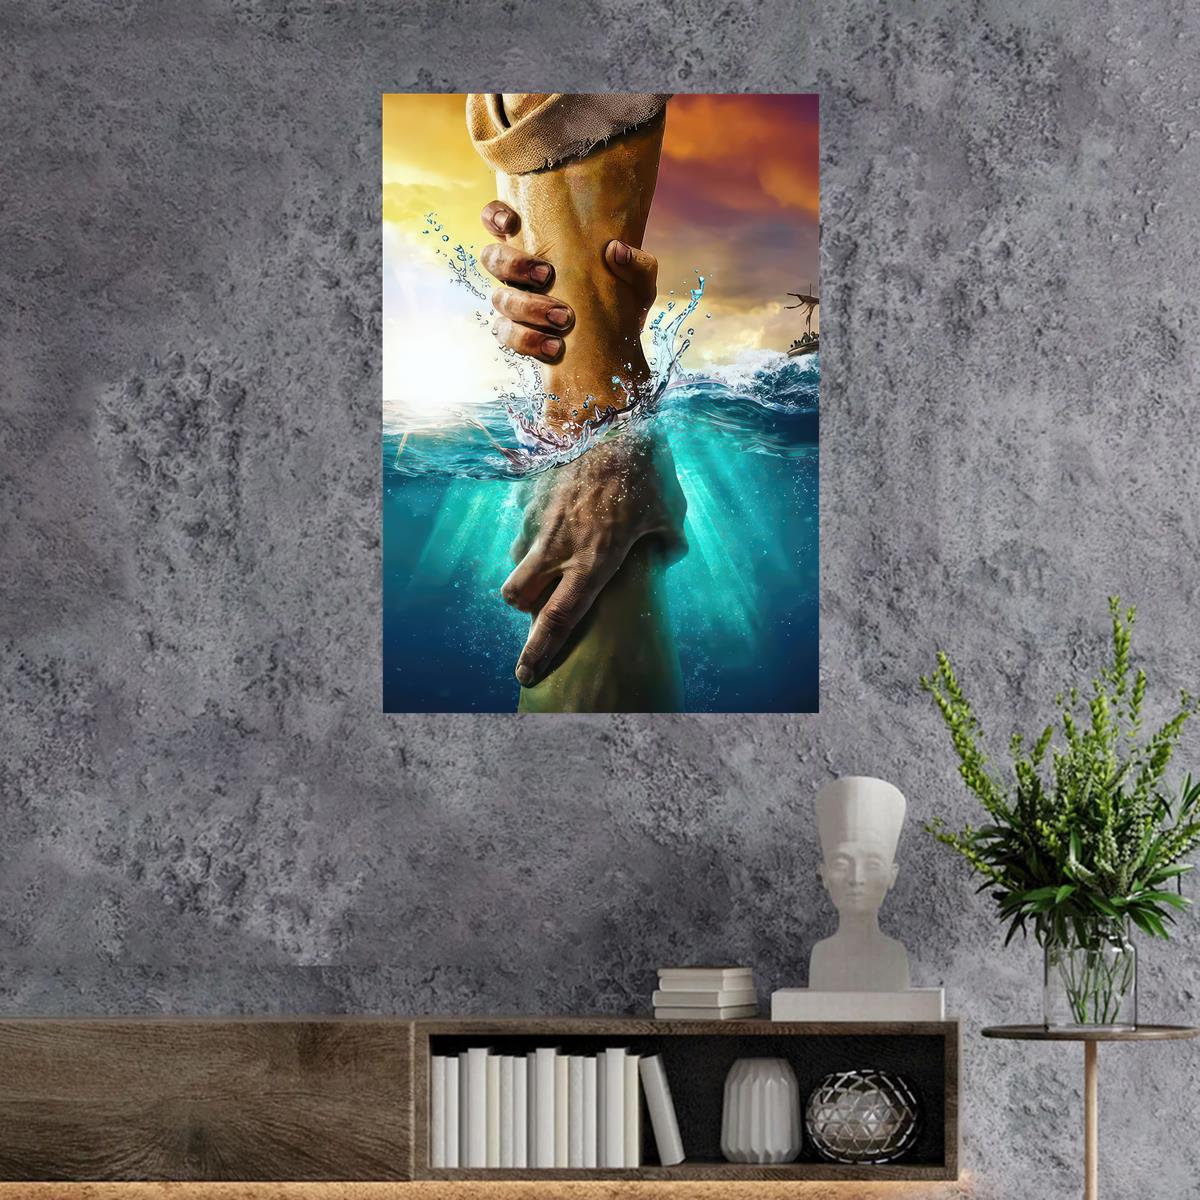 Inspirational Christian Canvas Wall Art, Don't Be Afraid, Just Have Faith  Wall Decor For Home Office Living Room Bedroom Church Bar Coffee Shop, No  Frame Temu